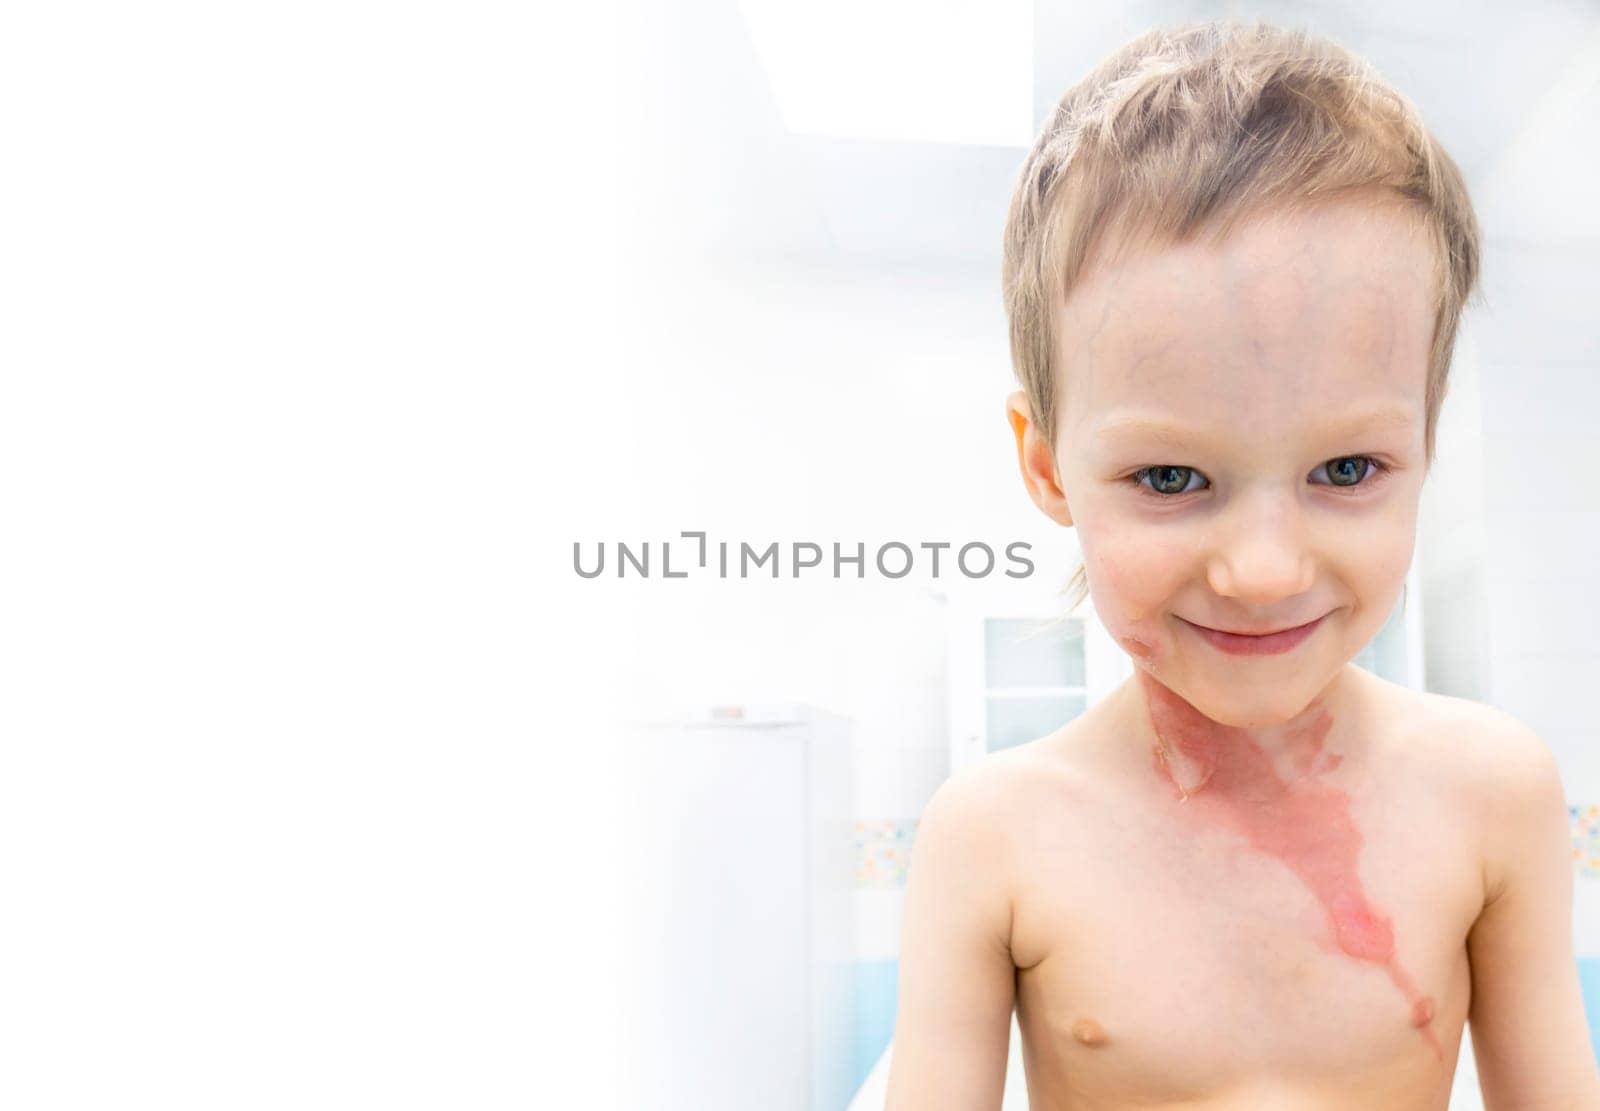 dressing a boy with a burn from boiling water by kajasja